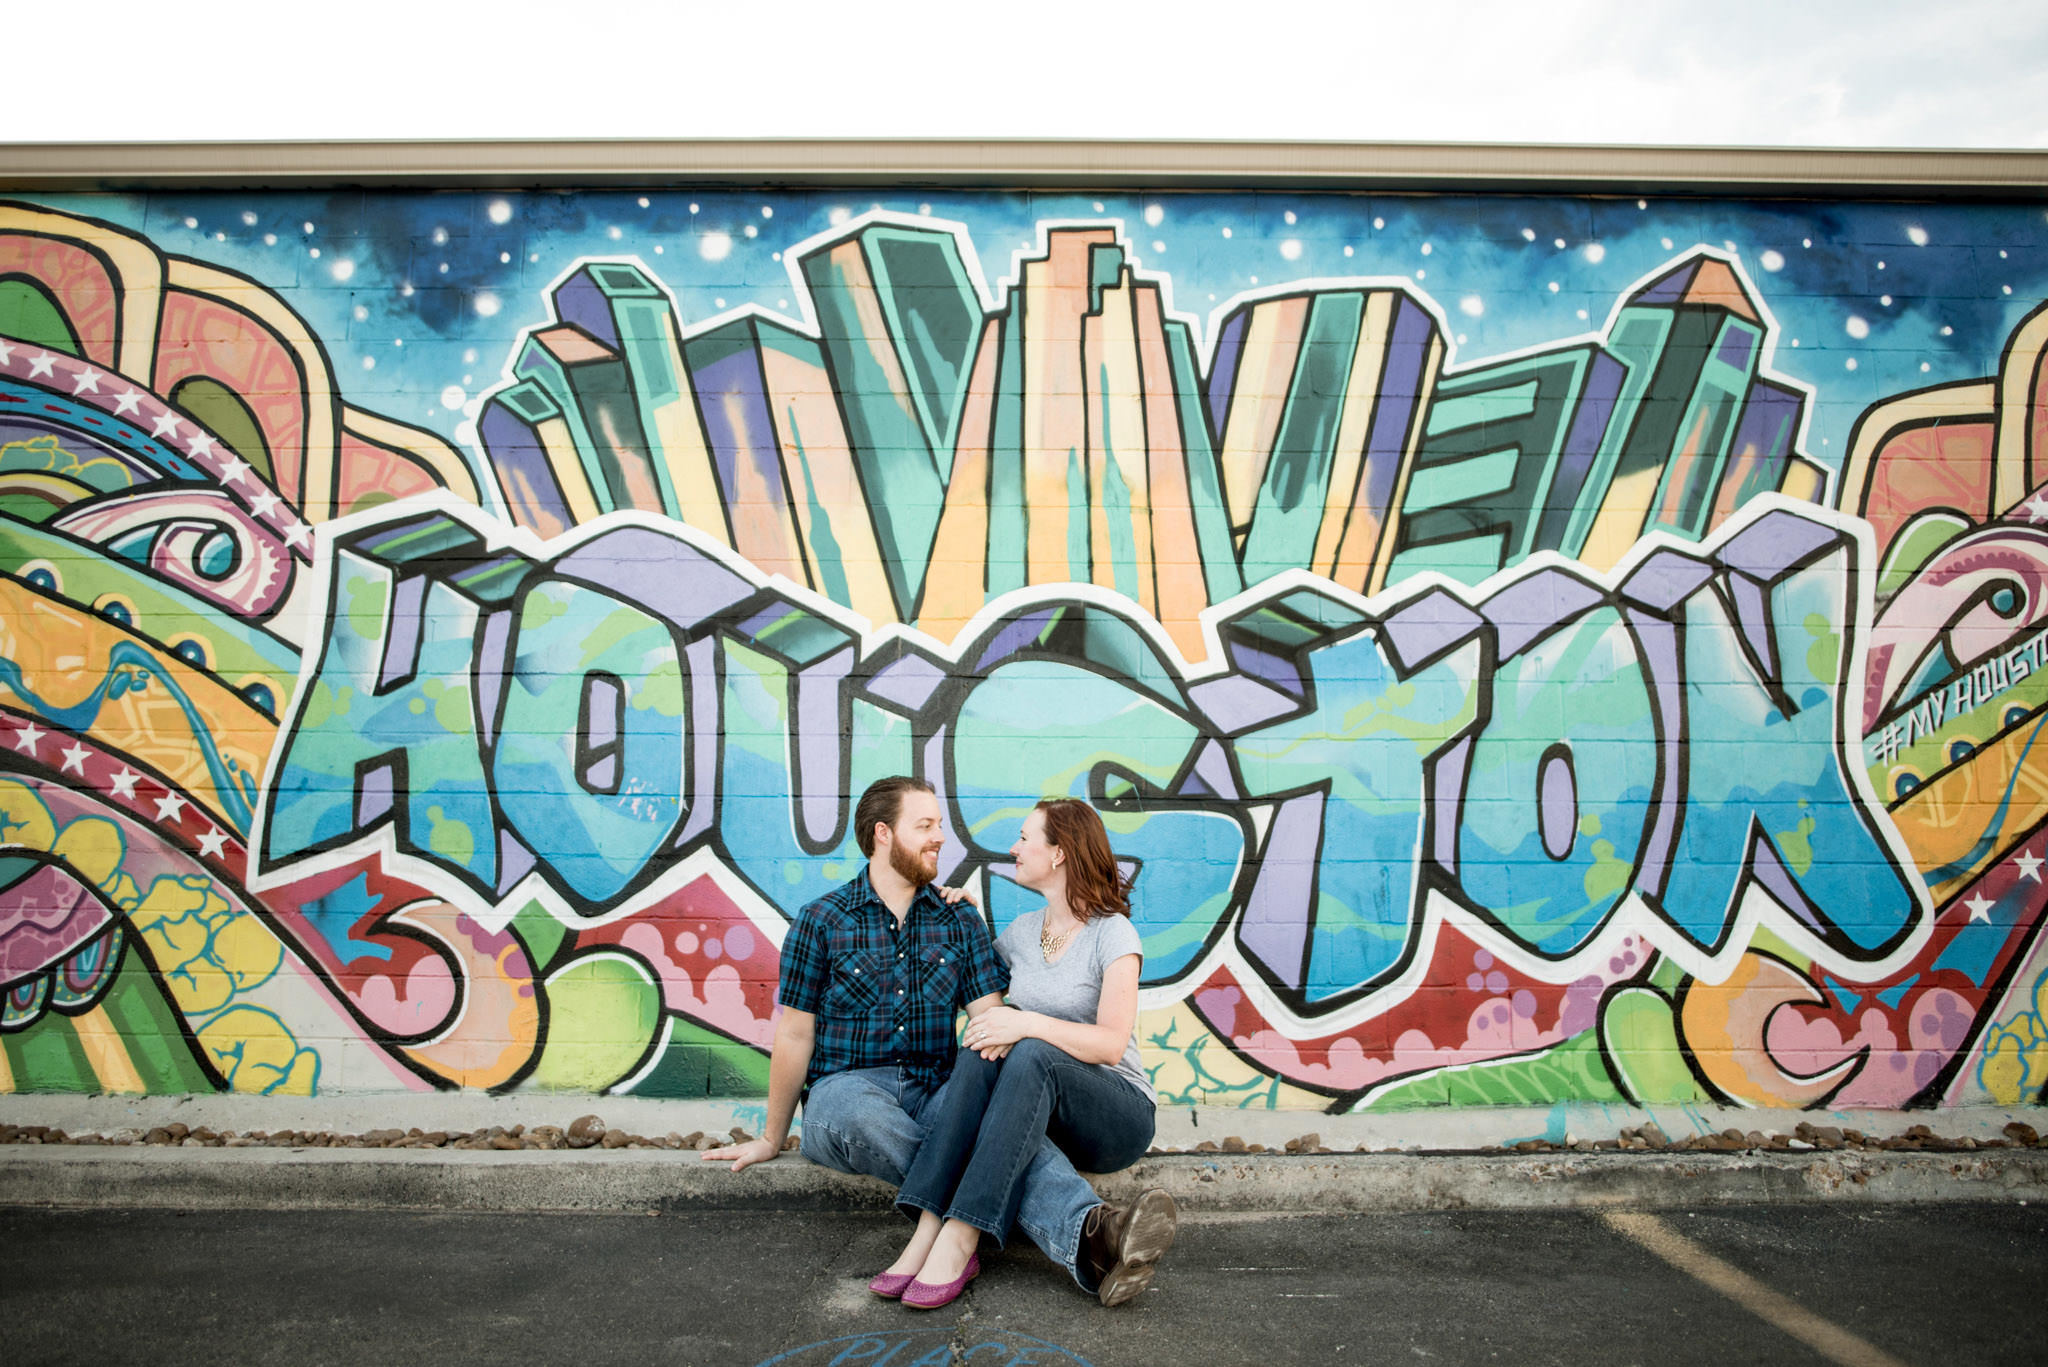 Houston-graffiti-wall-colorful-engagement-session-photography